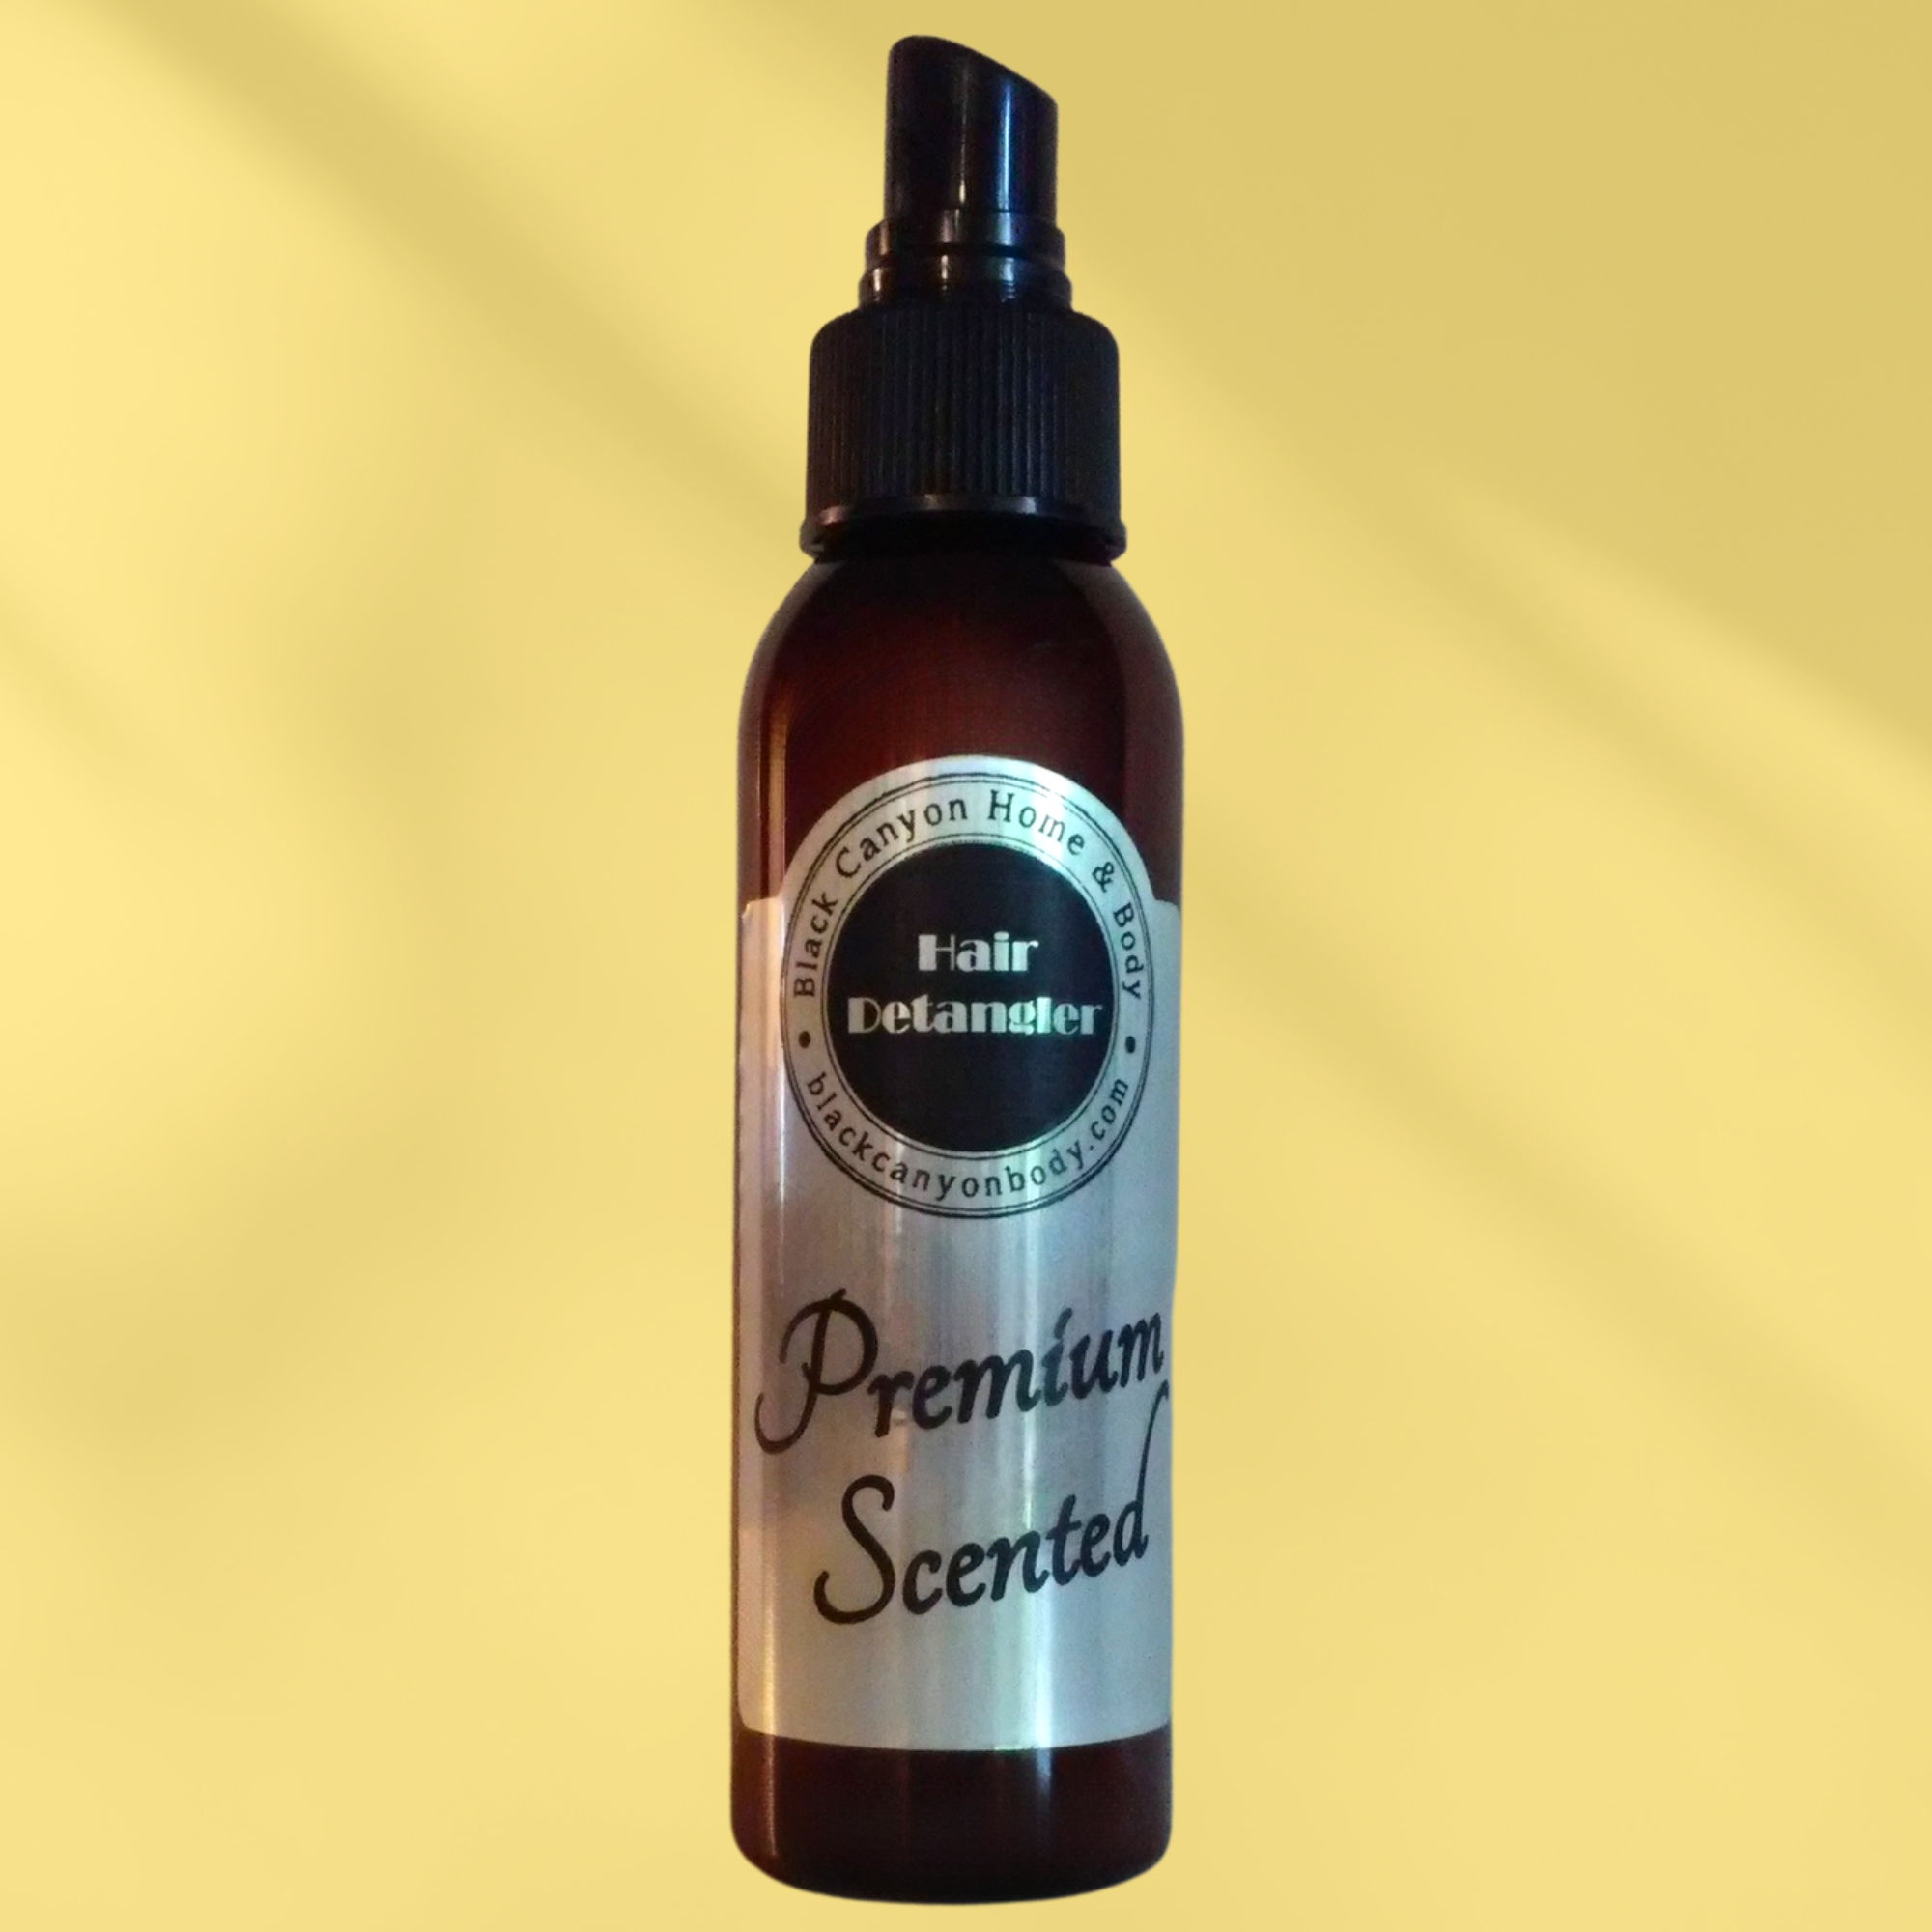 Black Canyon Black Currant & Cognac Scented Hair Detangler Spray with Olive Oil